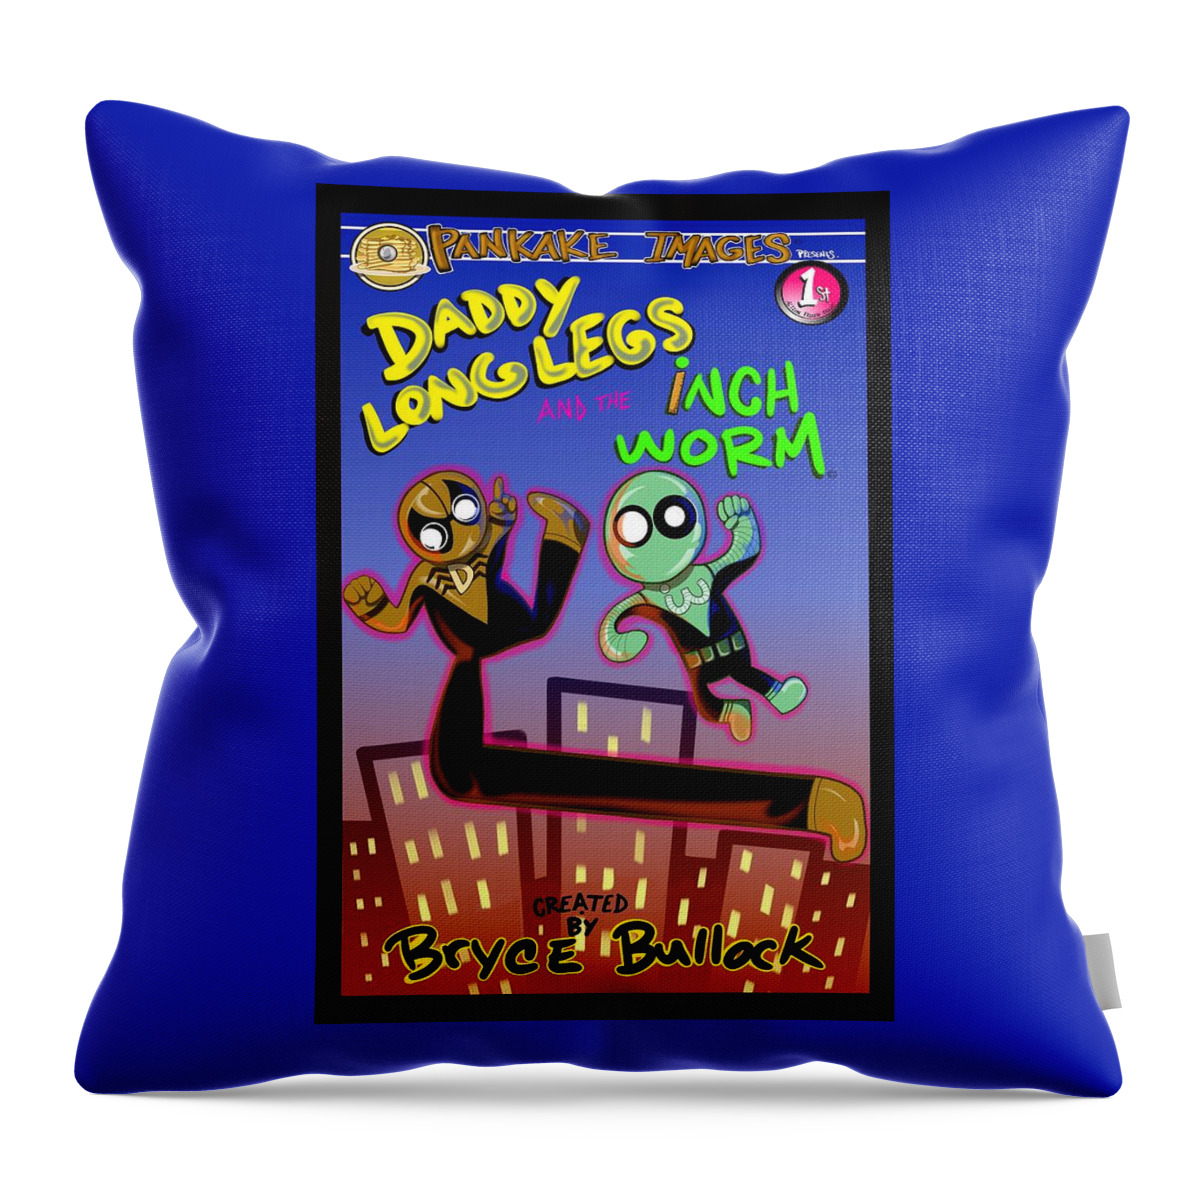 Superheroes Throw Pillow featuring the mixed media Daddy Long Legs and the Inchworm #1 by Demitrius Motion Bullock